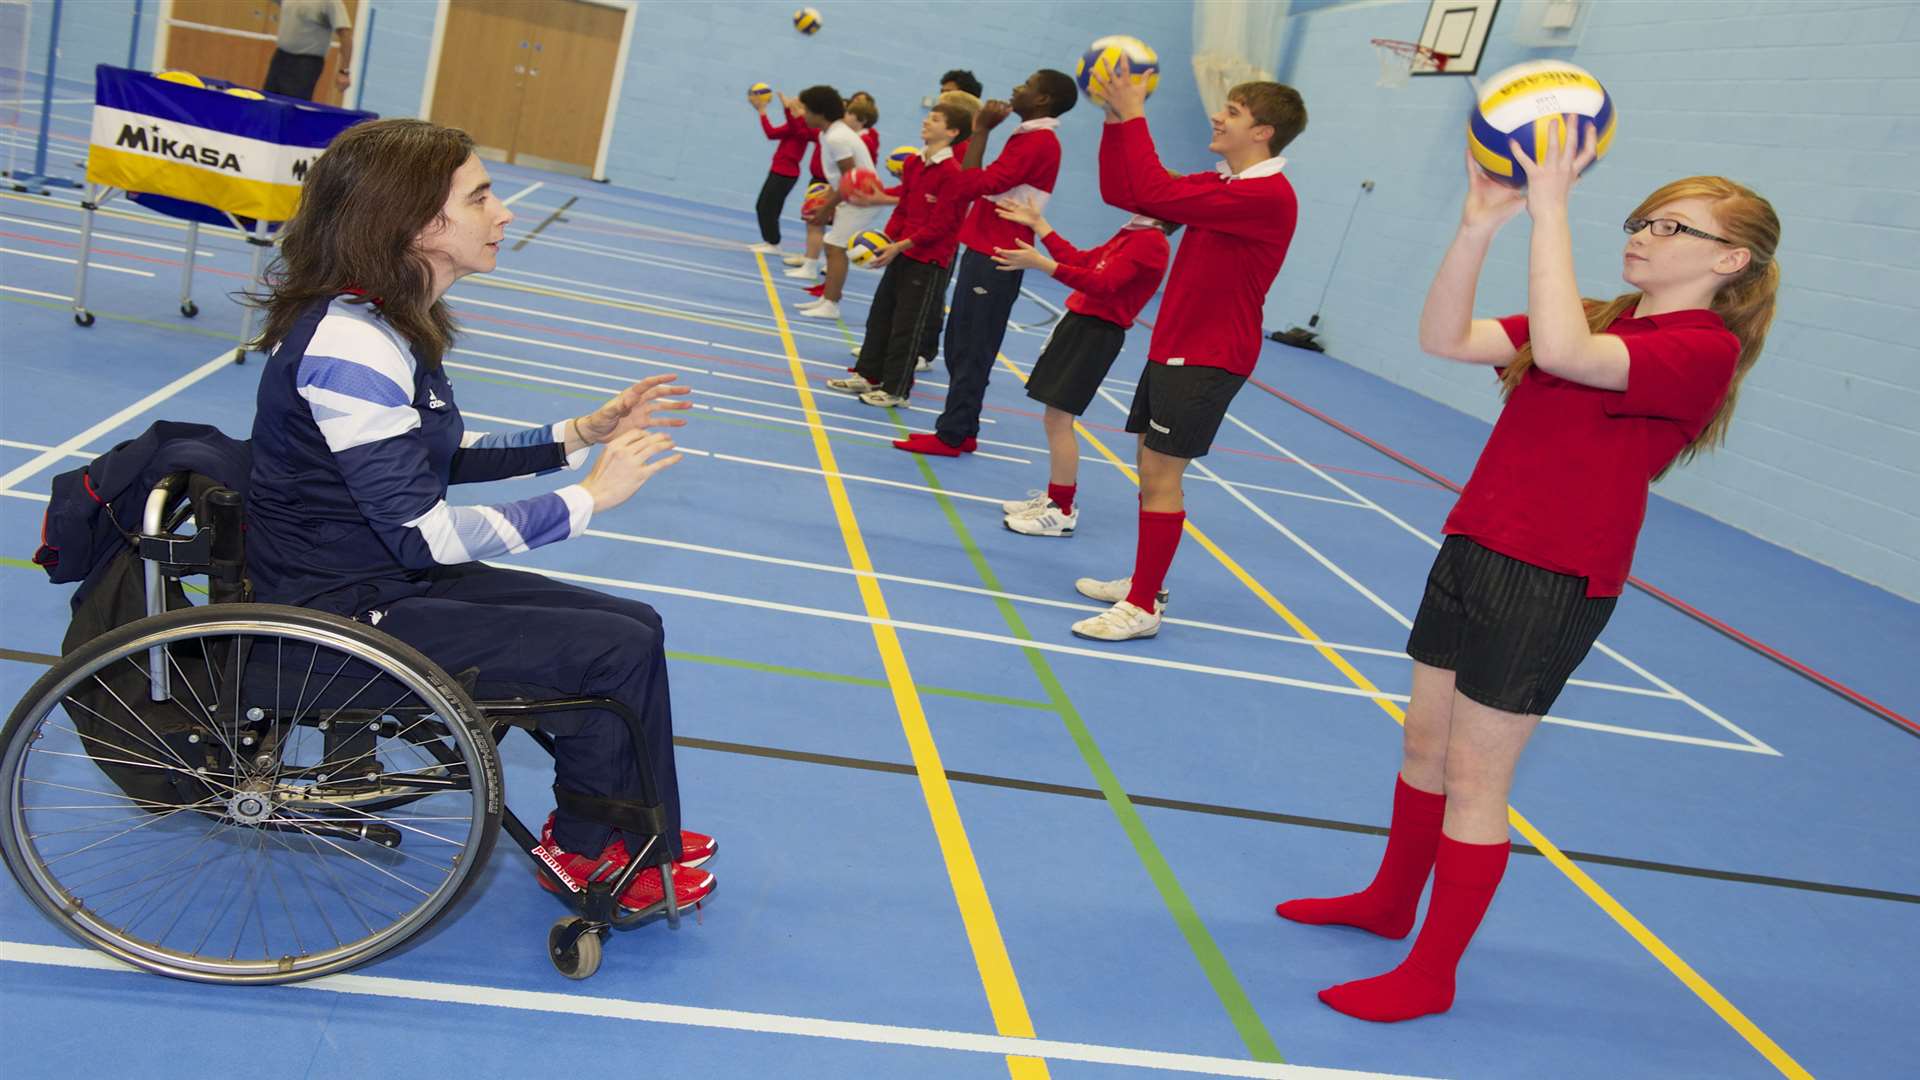 Practical session for the children of Rainham Mark Grammar School, from Team GB paralympic sitting volleyball captain Claire Harvey,